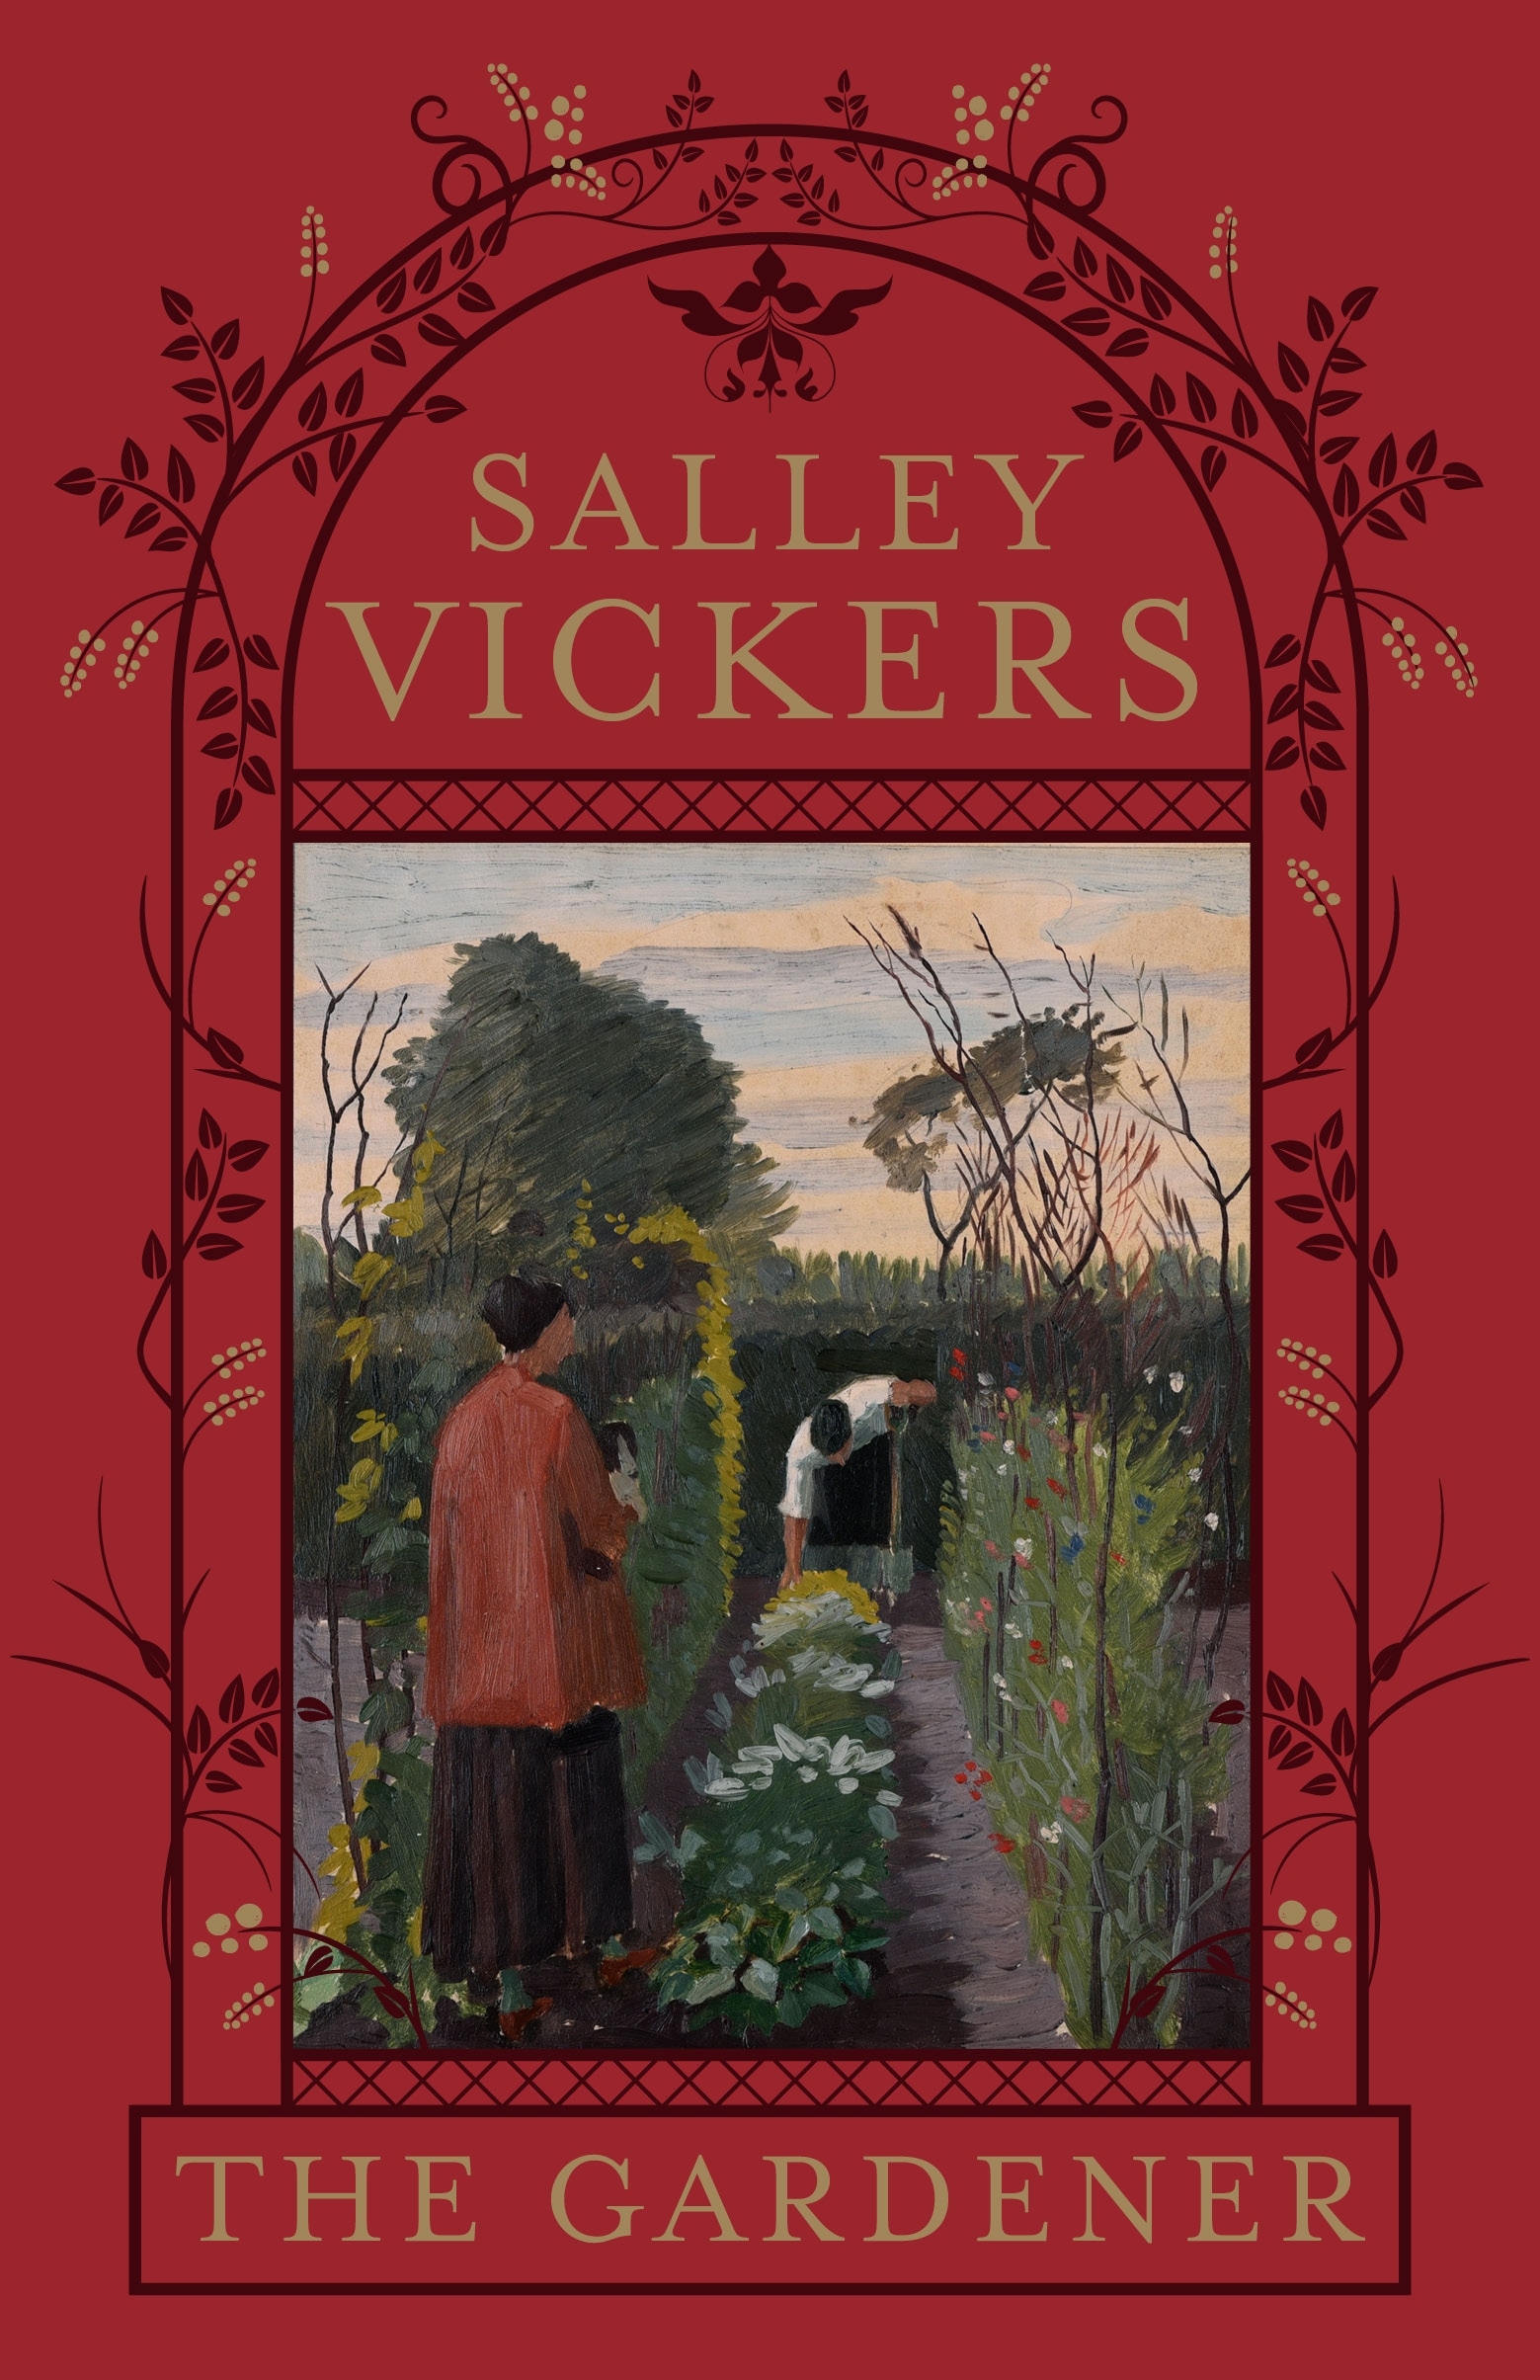 Book “The Gardener” by Salley Vickers — November 4, 2021